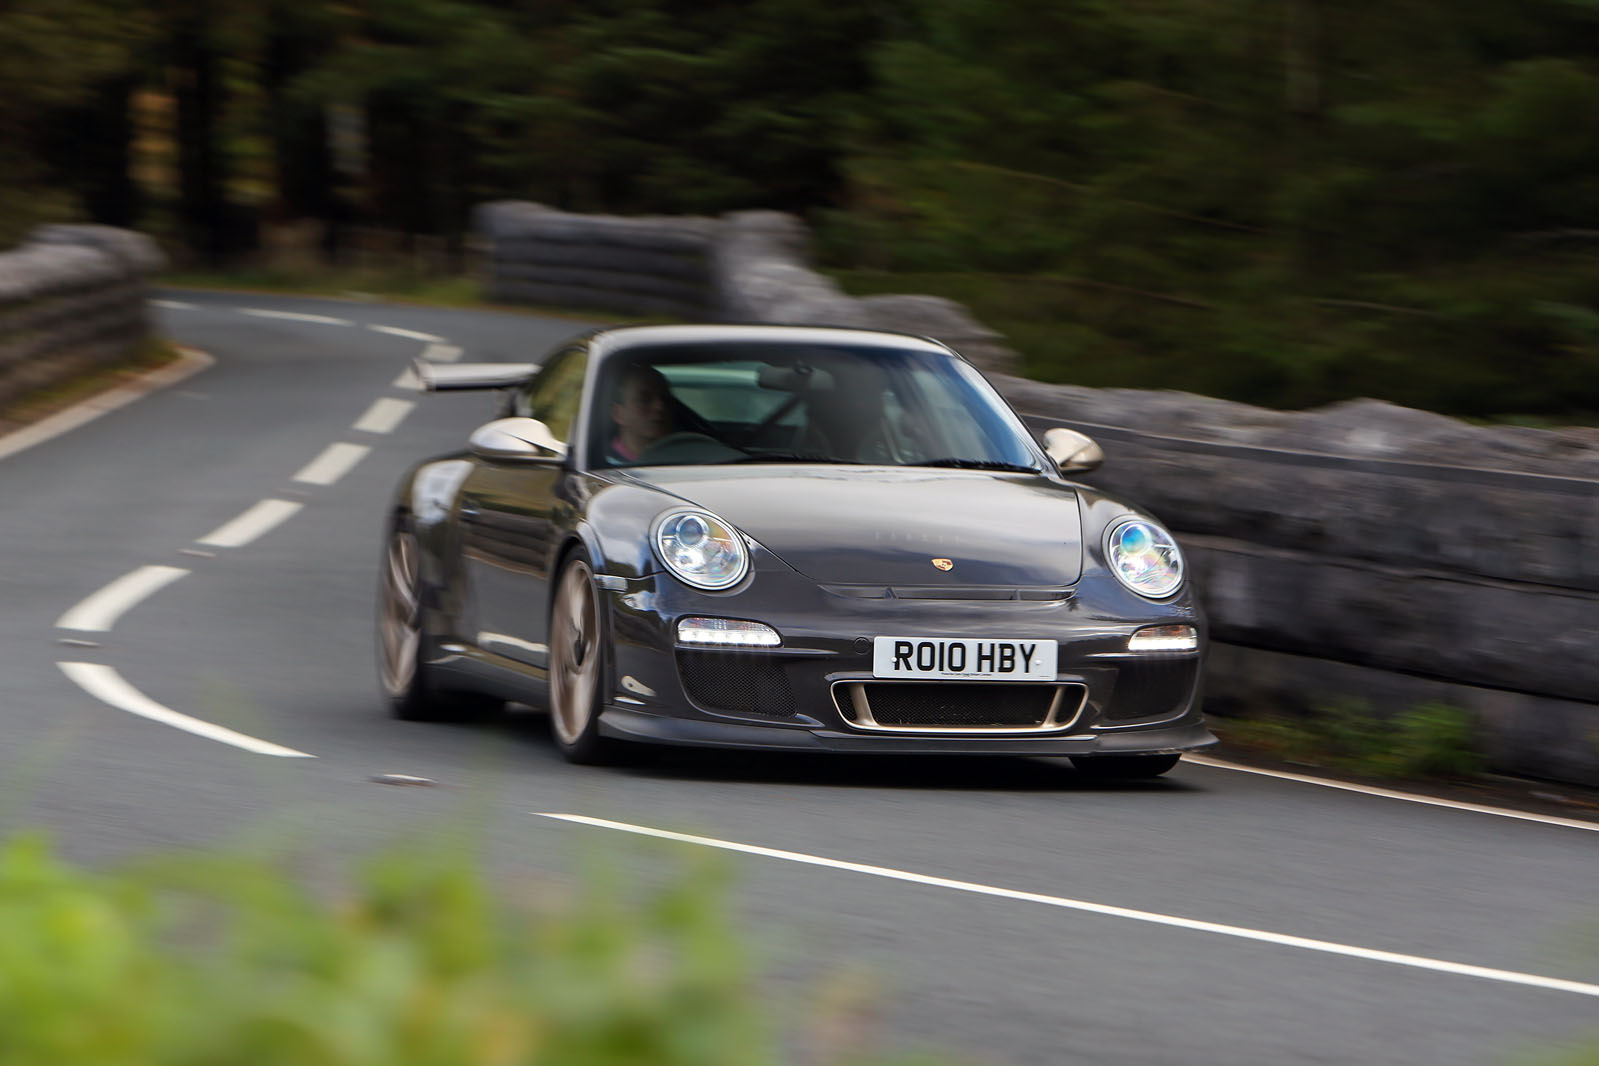 Porsche's greatest hits: driving a 997 GT3 RS